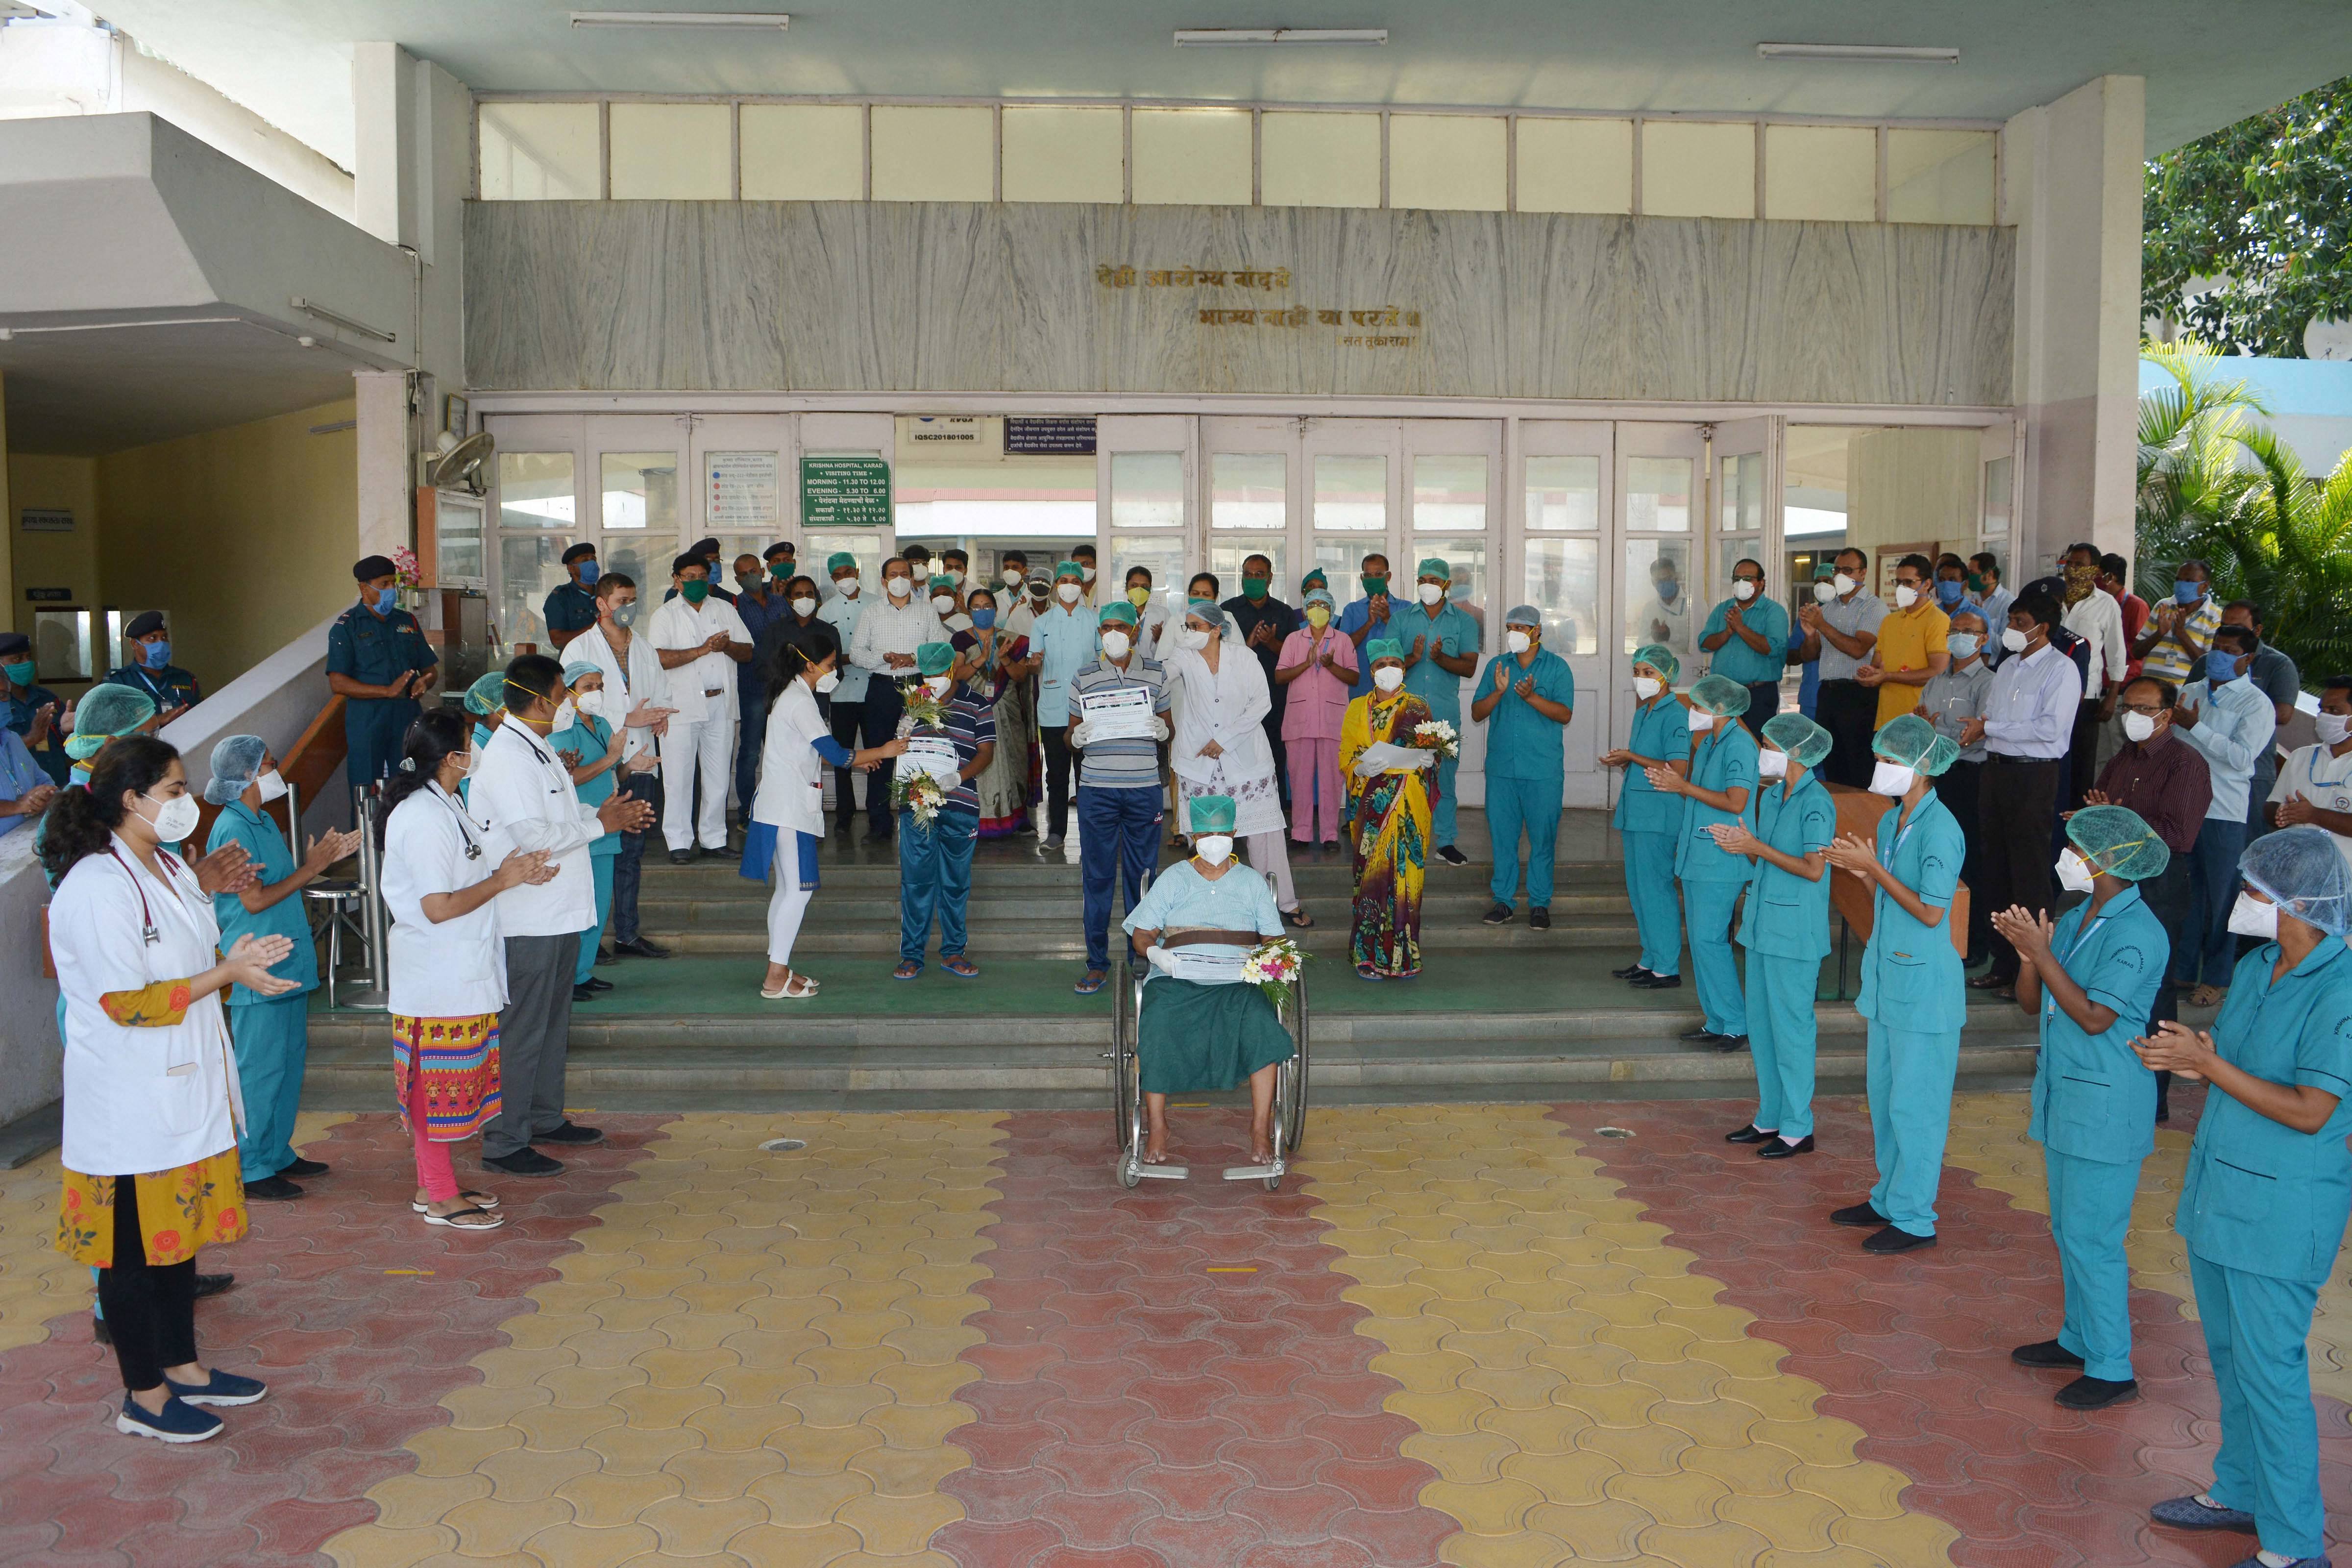 Medics and hospital staff applaud as patients who recovered from Covid-19 prepare to leave Krishna Hospital, during the ongoing Covid-19 nationwide lockdown, in Karad, Wednesday, May 13, 2020.